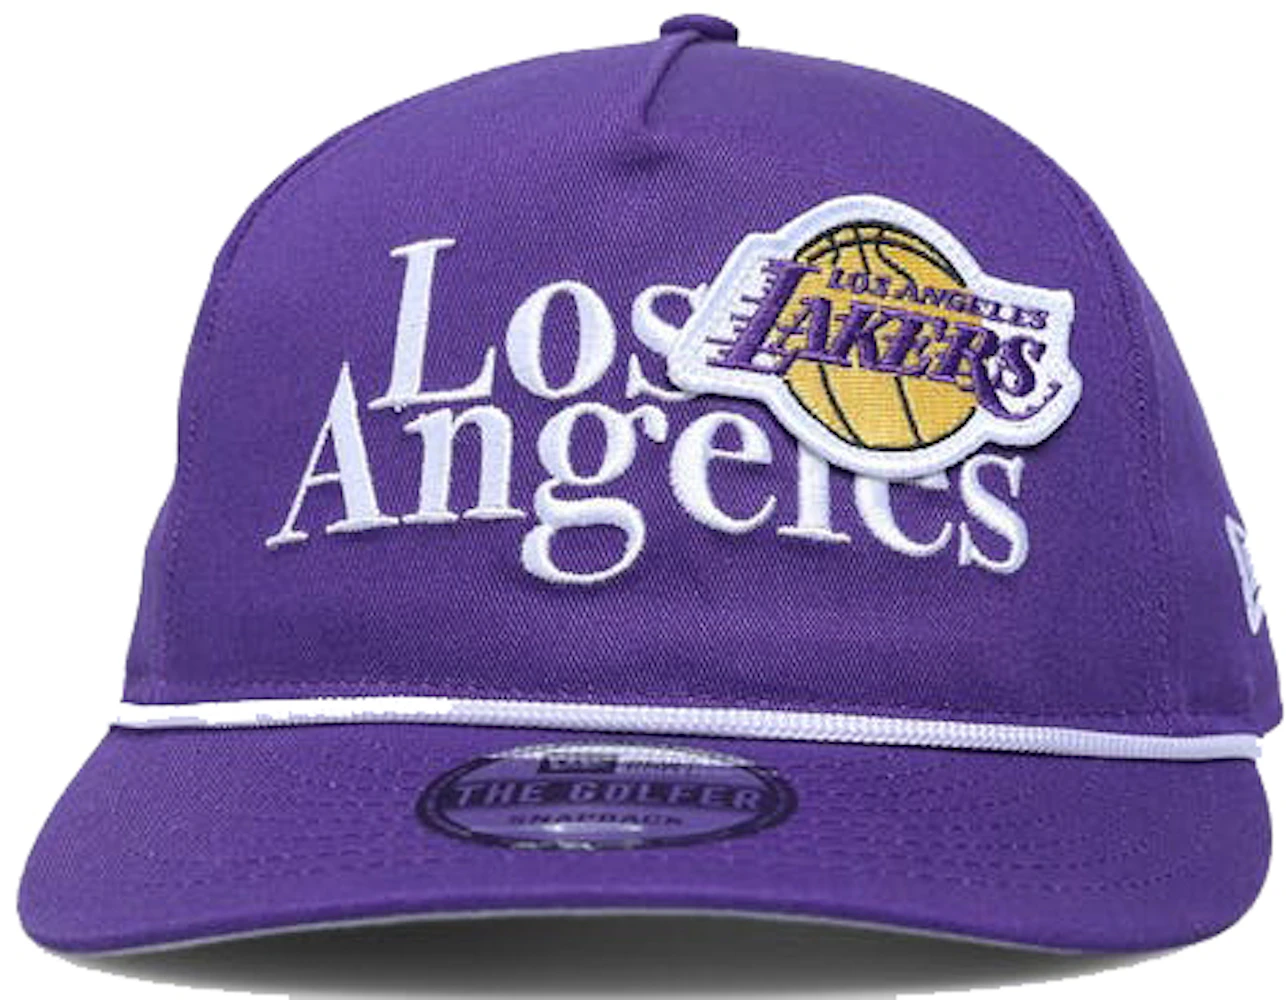 Men's Mitchell & Ness Purple/Gold Los Angeles Lakers Half and Half Snapback Hat